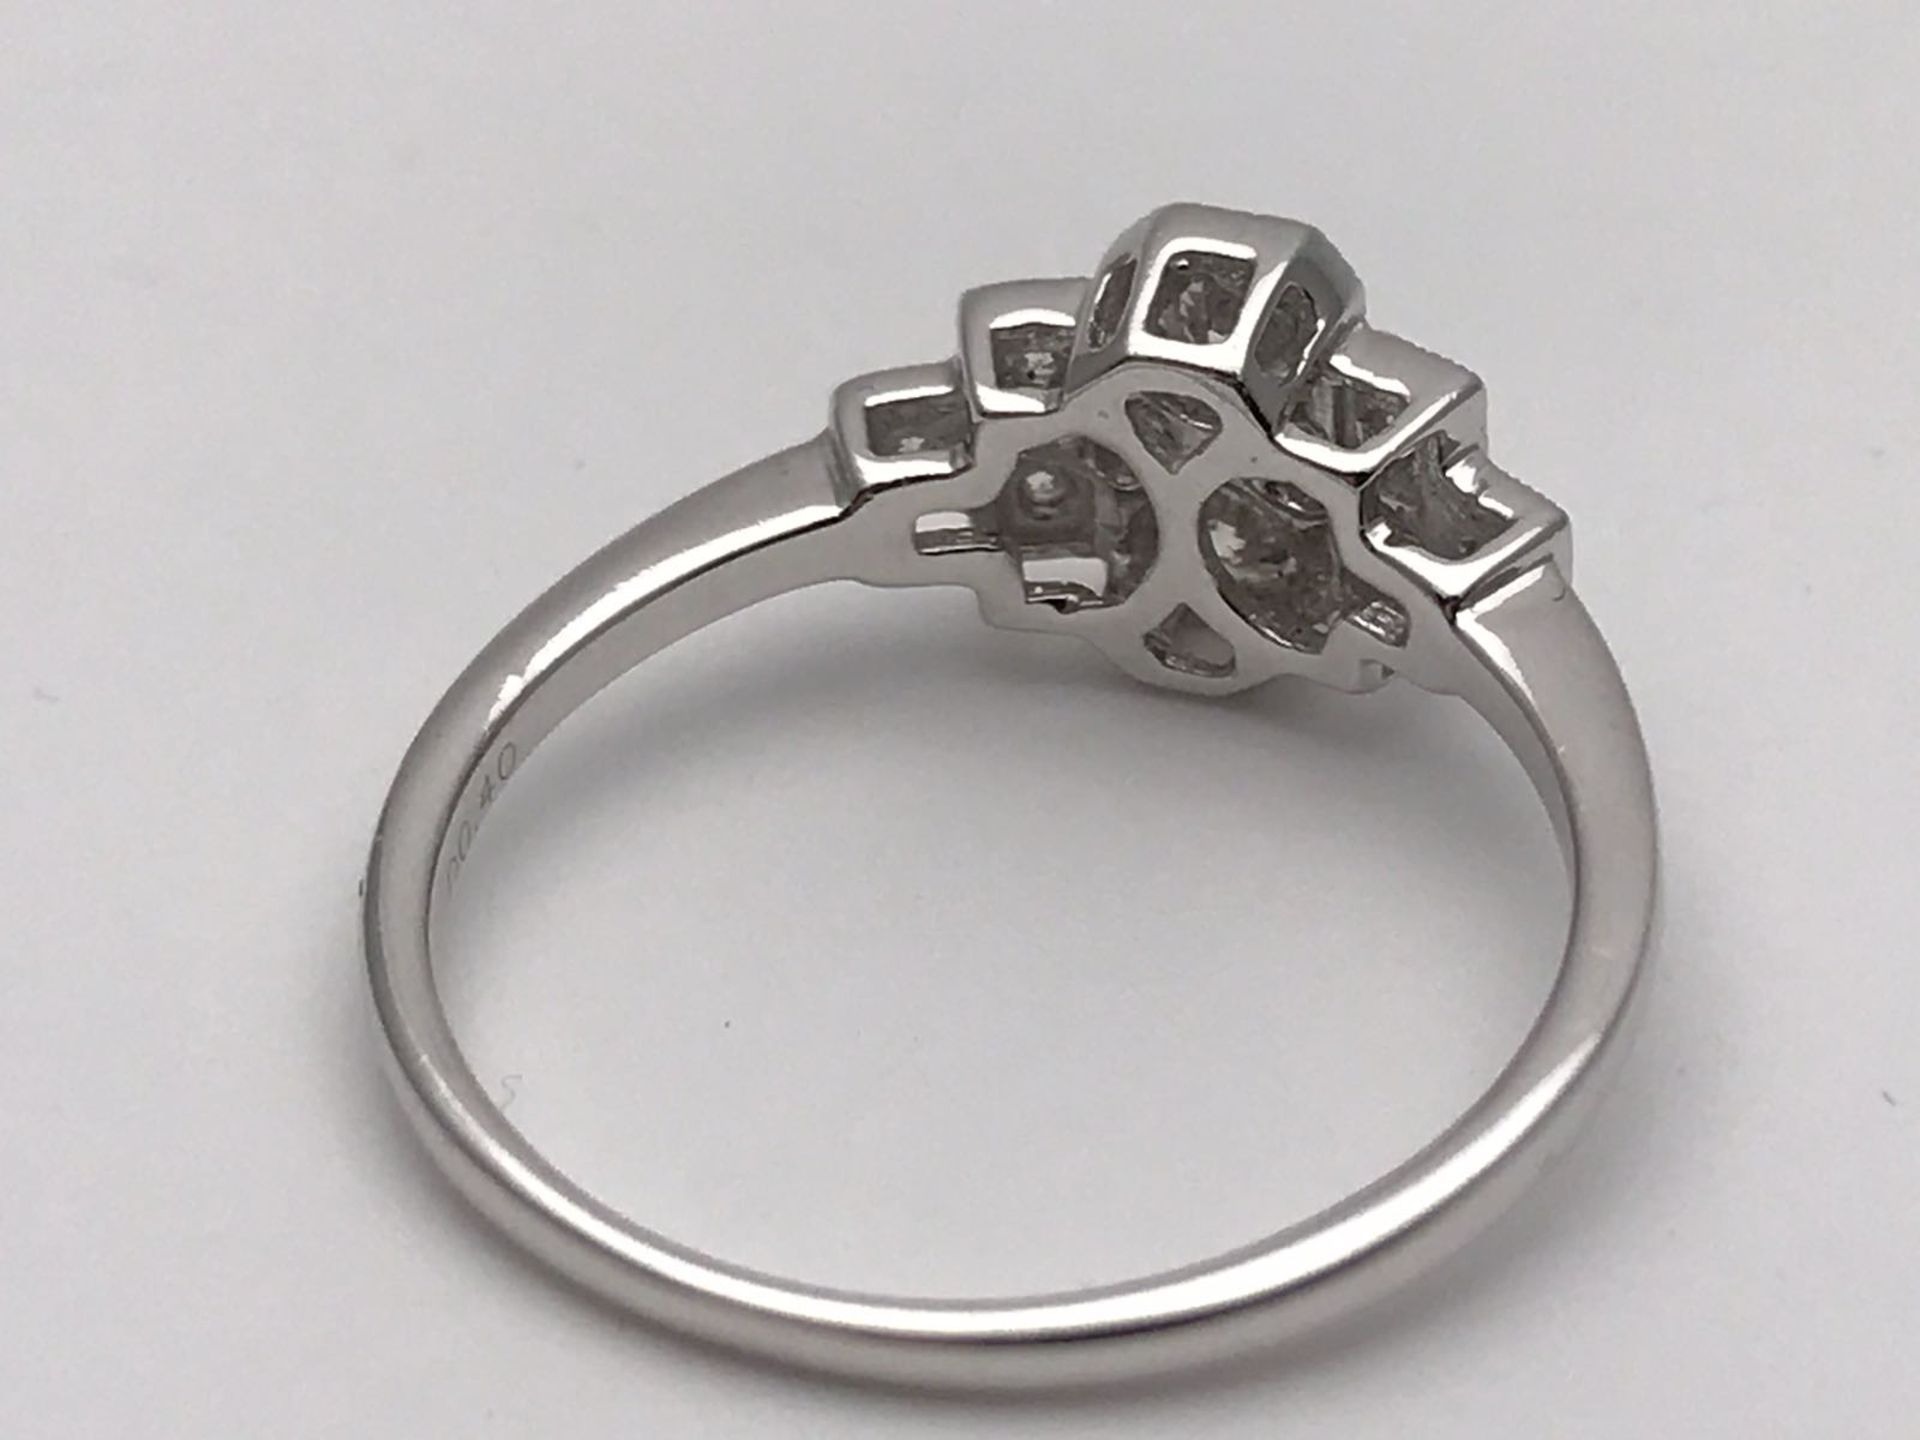 RRP £3000 A STUNNING WHITE GOLD DIAMOND RING COMPRISING 8 BRILLIANT ROUND DIAMONDS OF TOP QUALITY- - Image 3 of 4